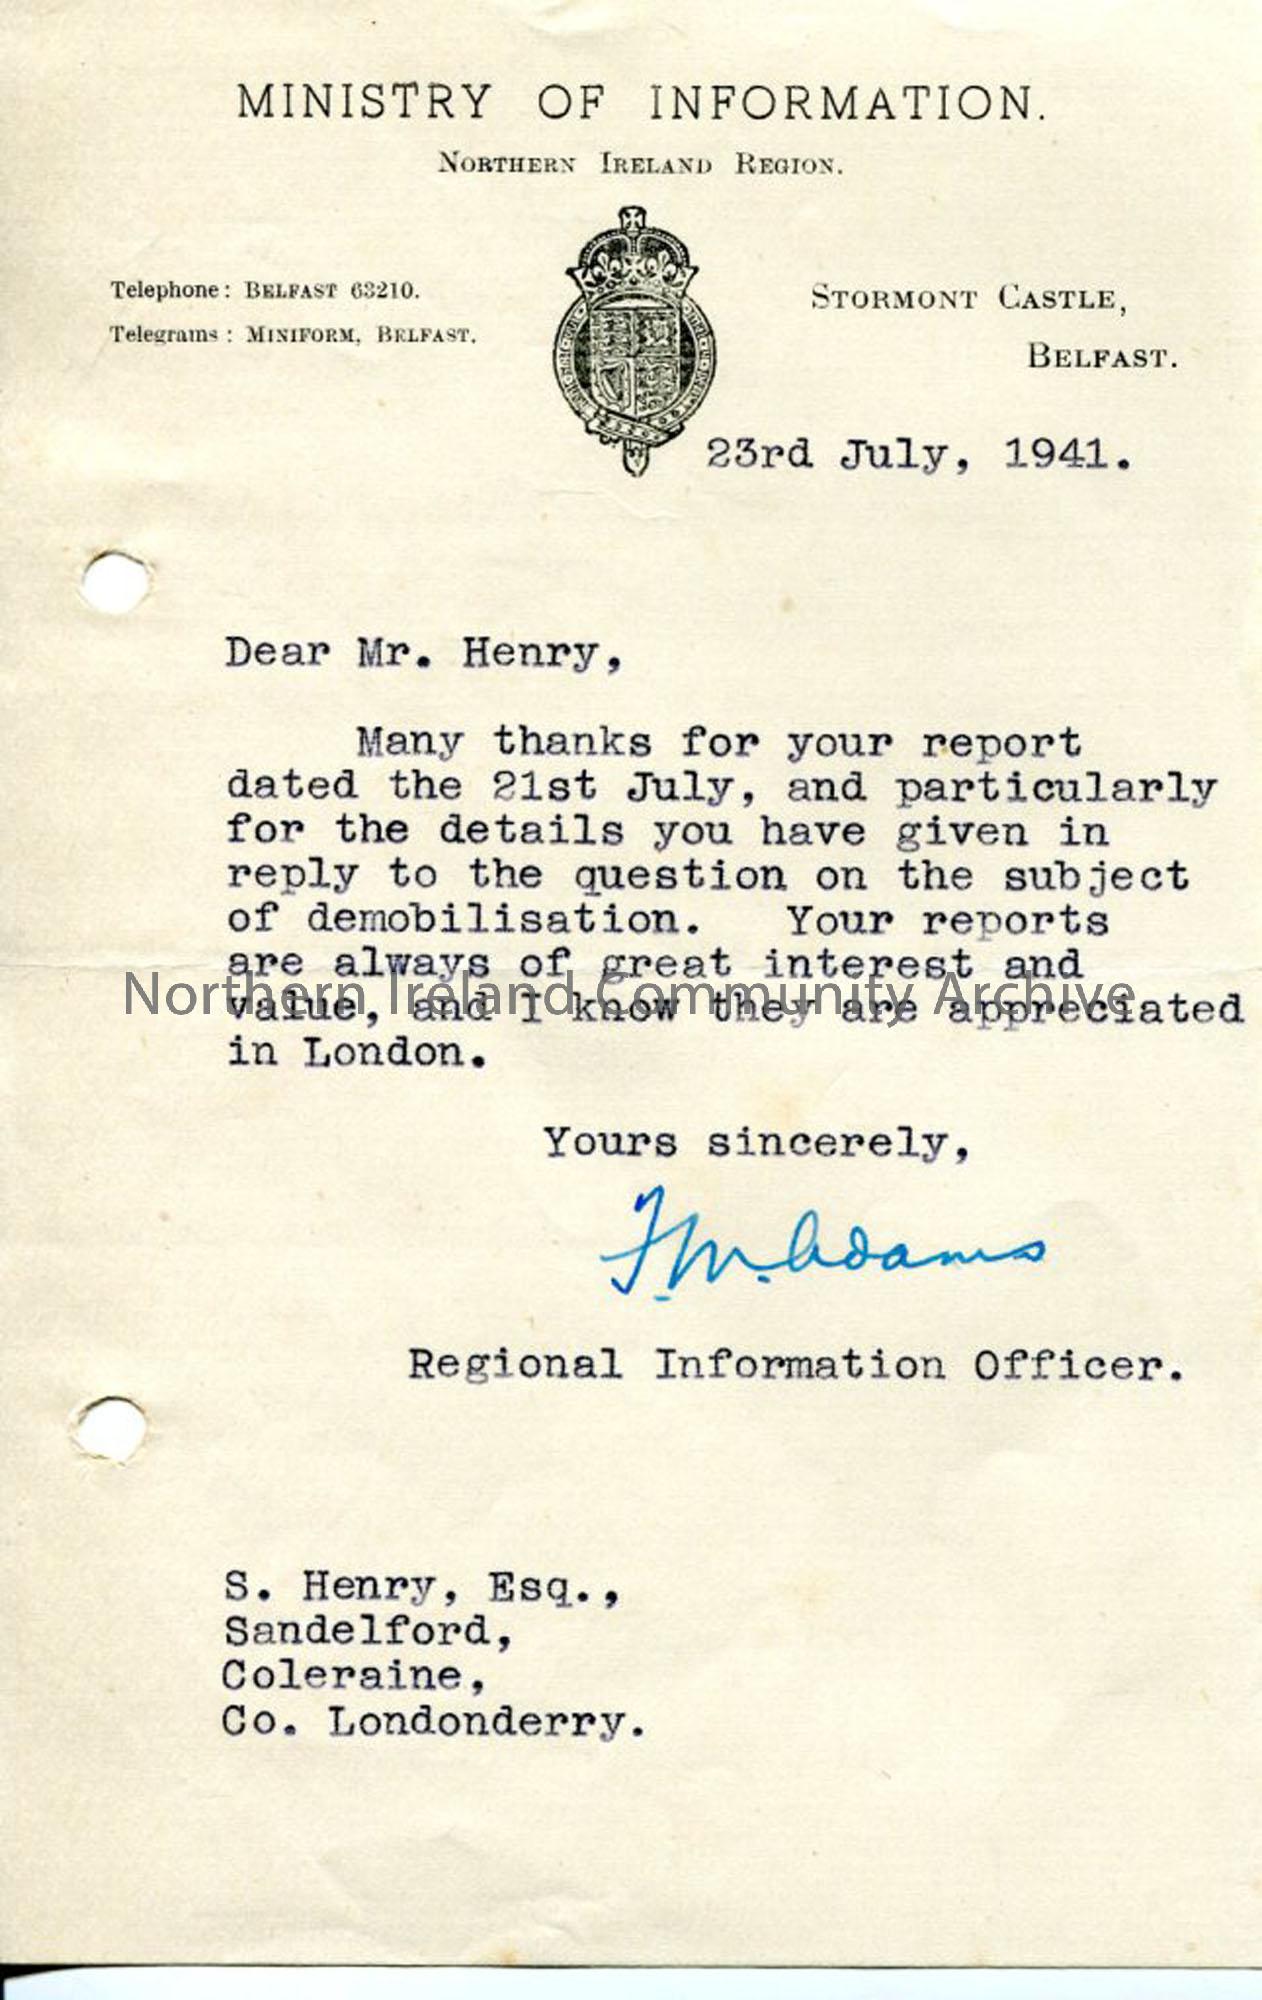 Letter from Ministry of Information to Sam Henry